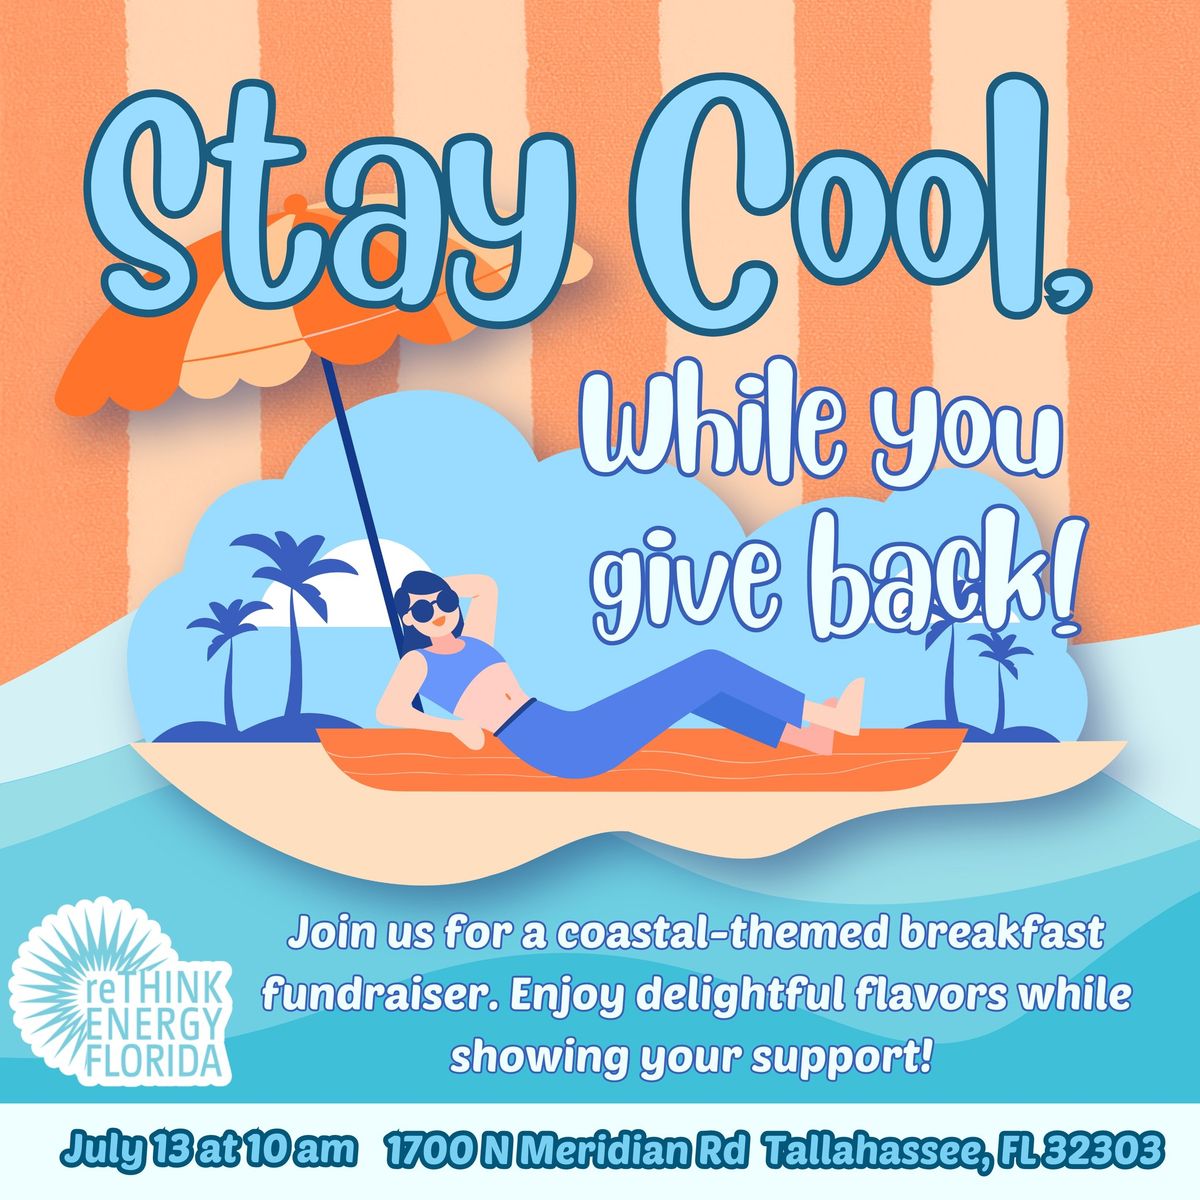 Stay Cool, While You Give Back! 